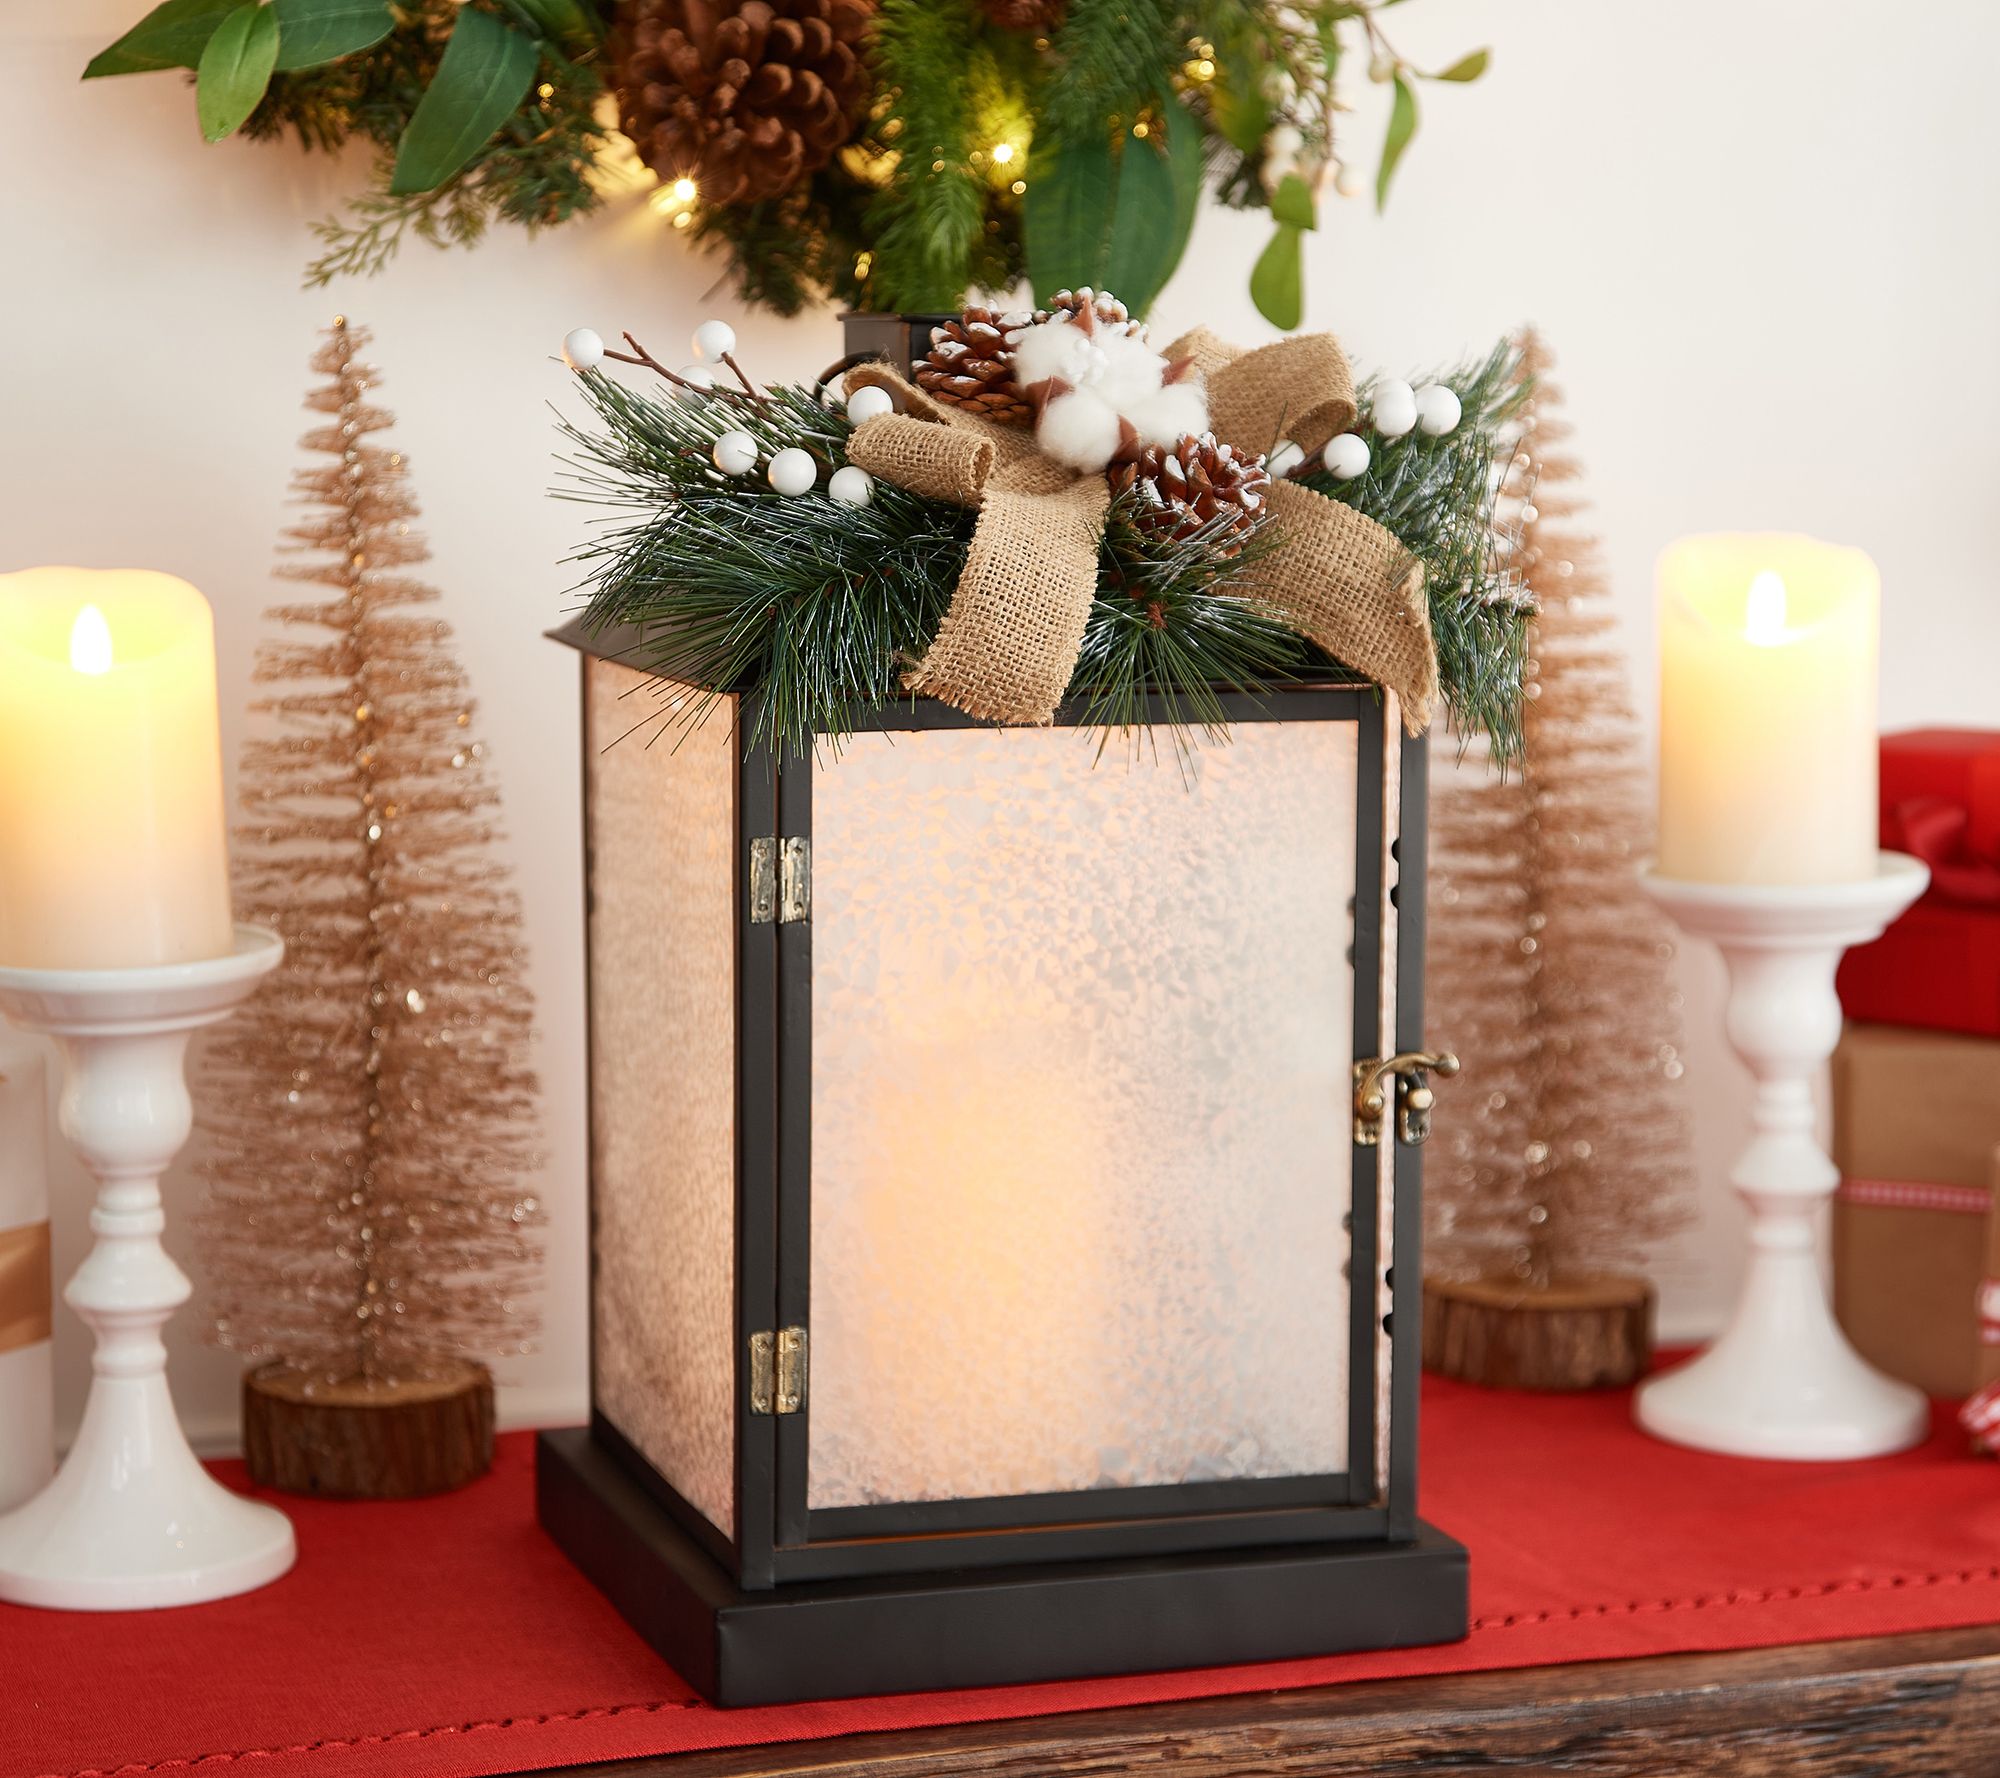 16 Christmas Lantern Ideas - How to Decorate with Holiday Lanterns